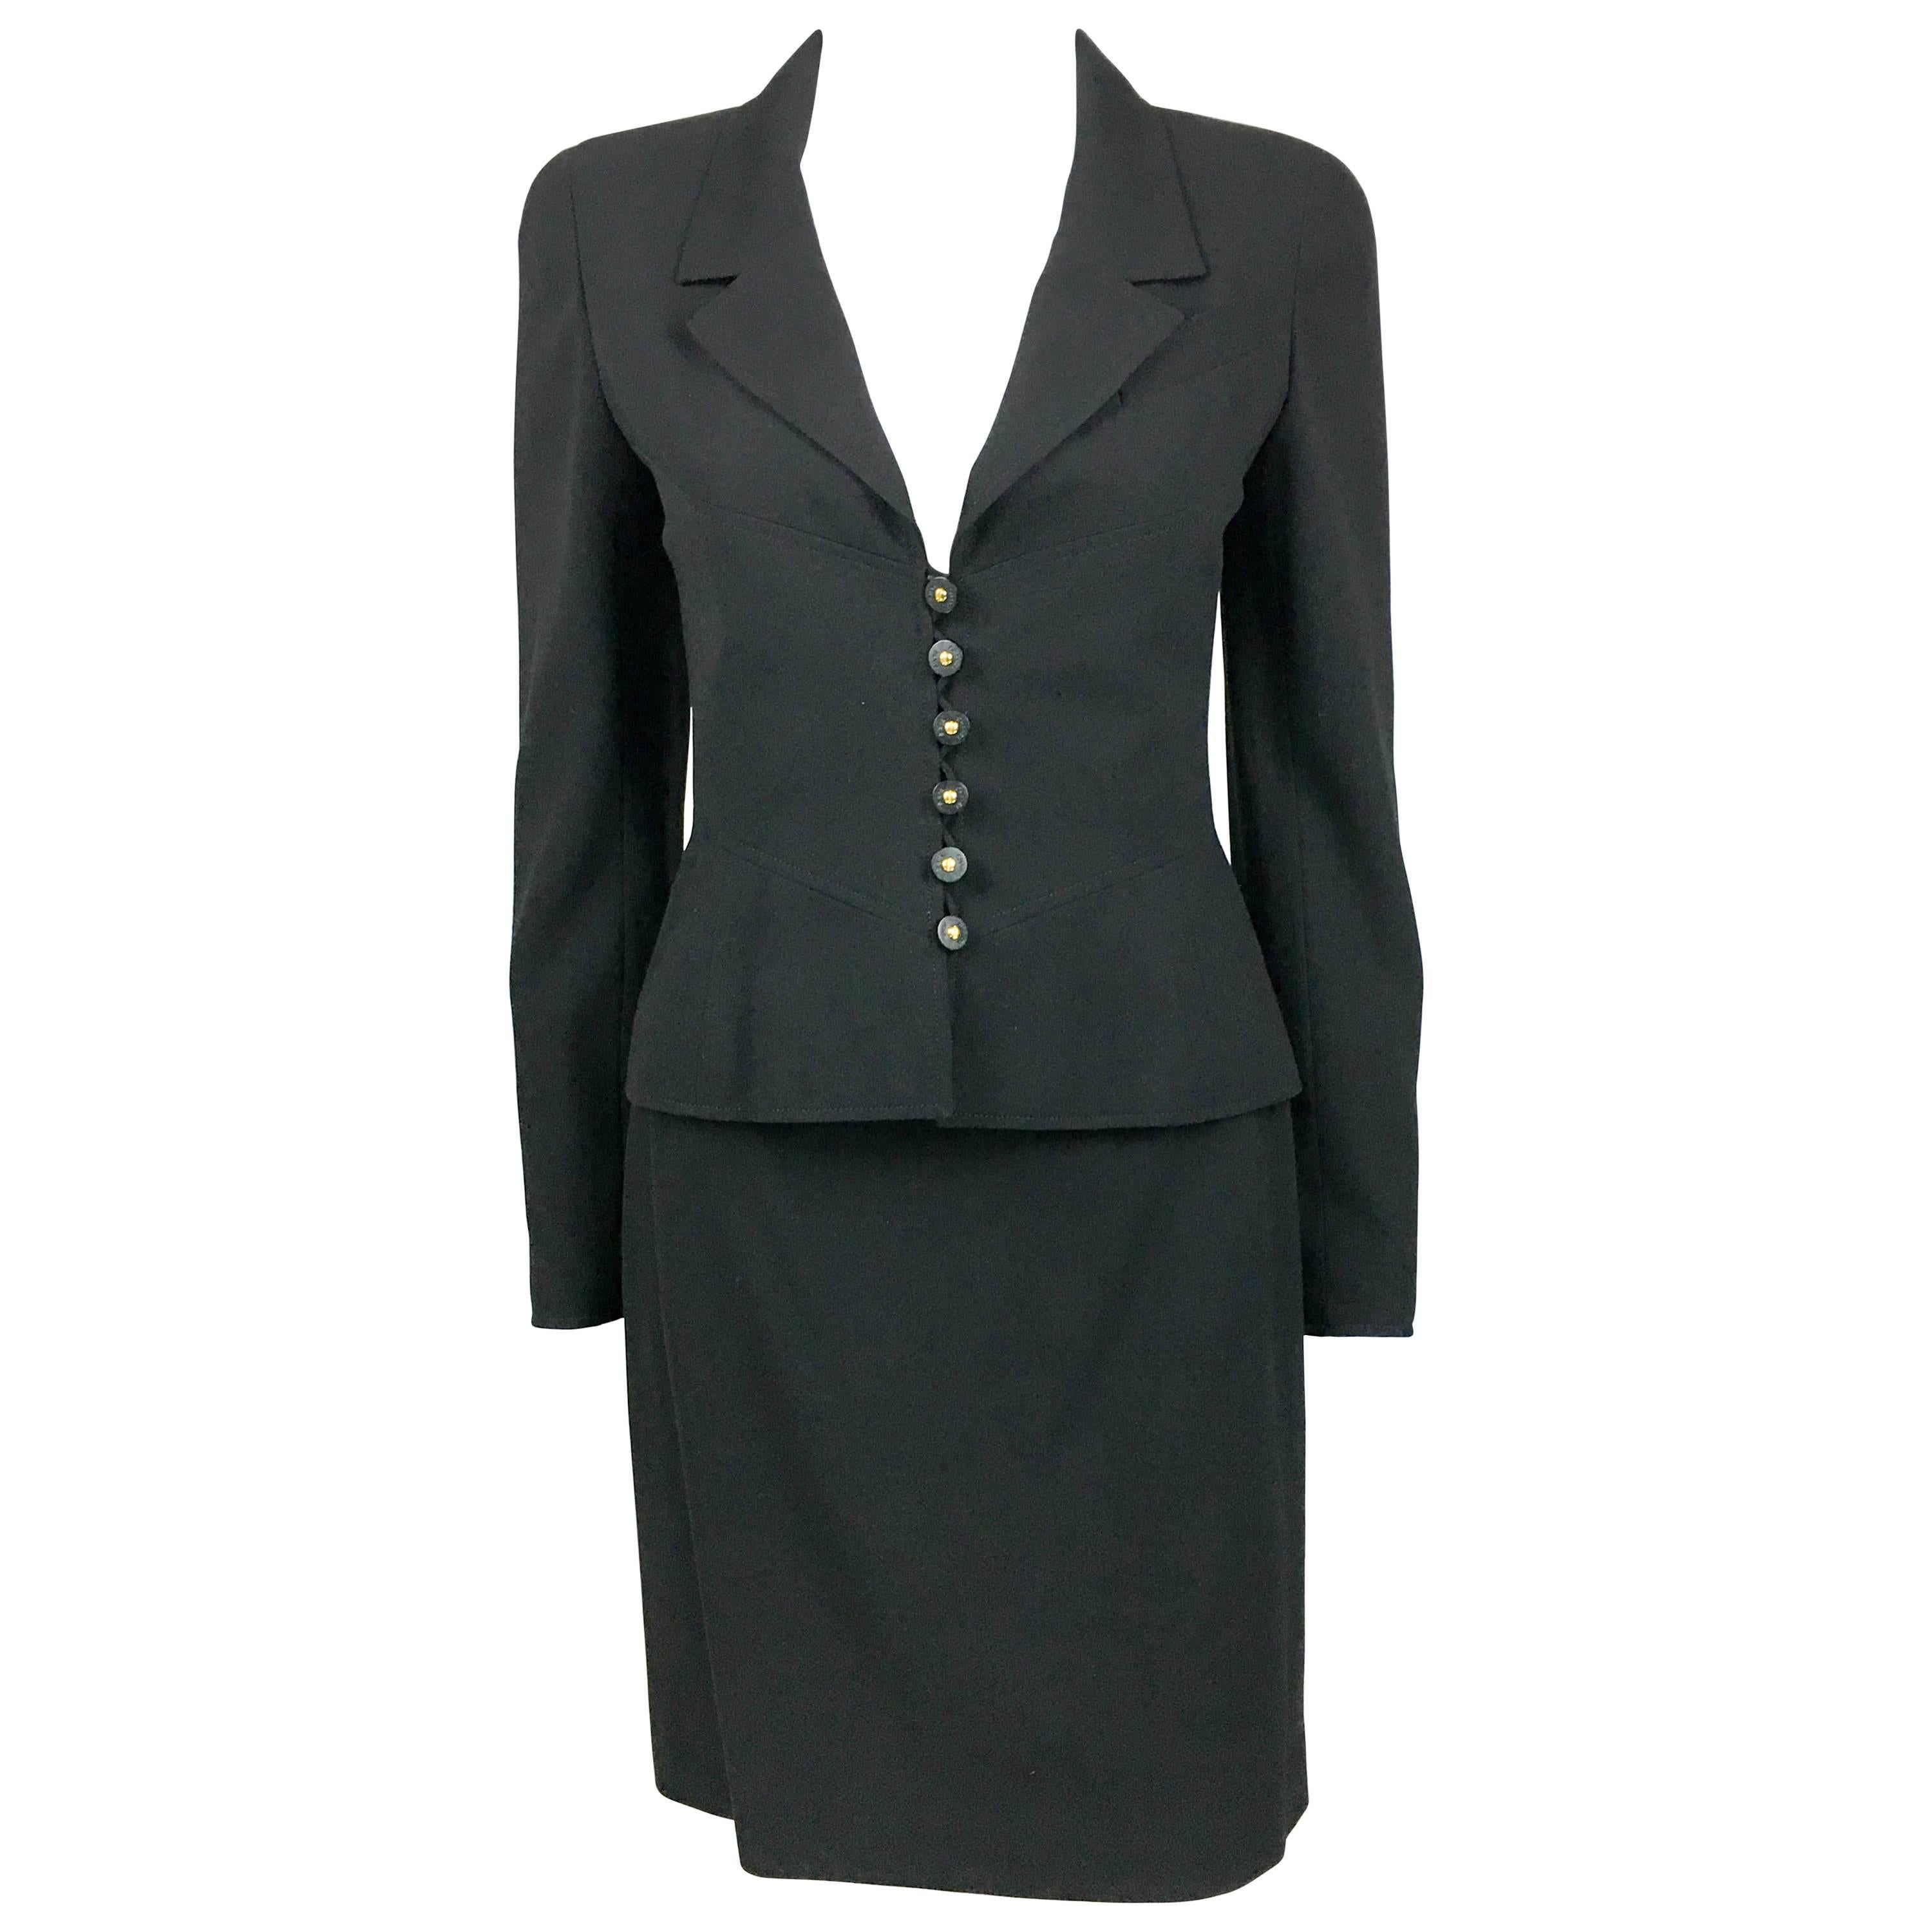 1997 Chanel Black Wool Skirt Suit For Sale